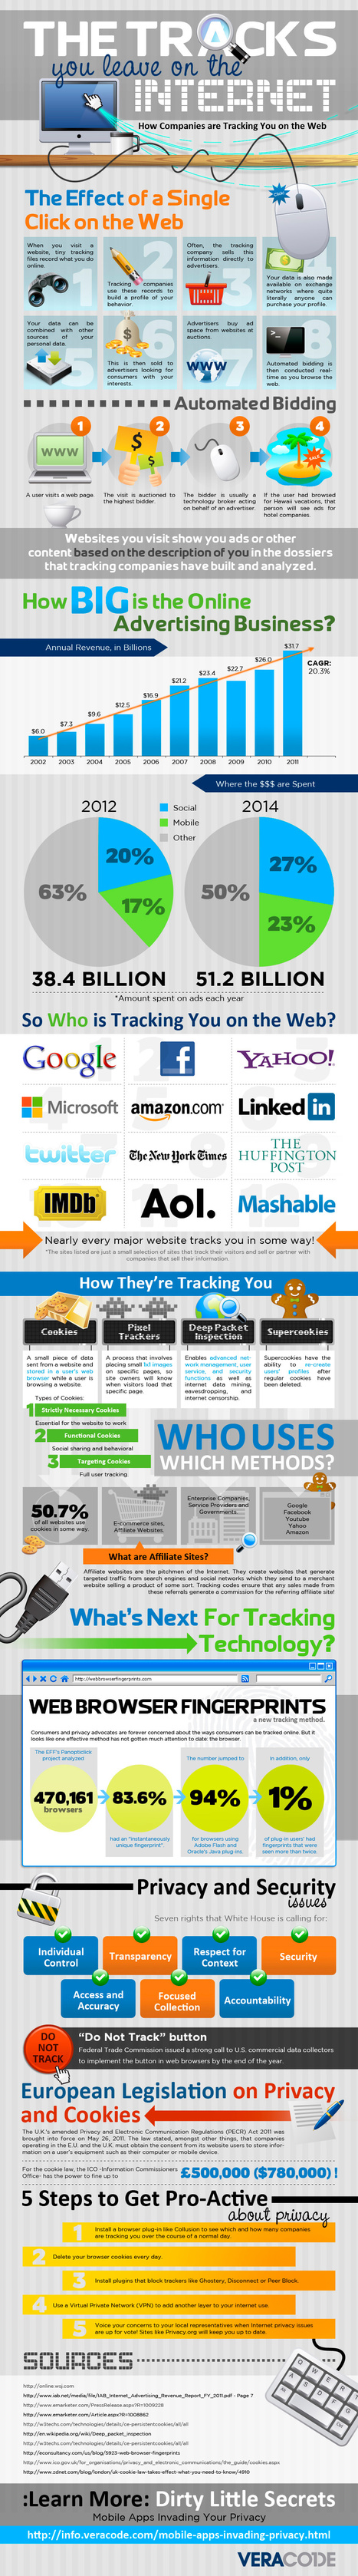 How Companies Track You on the Web [Infographic] | Strictly pedagogical | Scoop.it